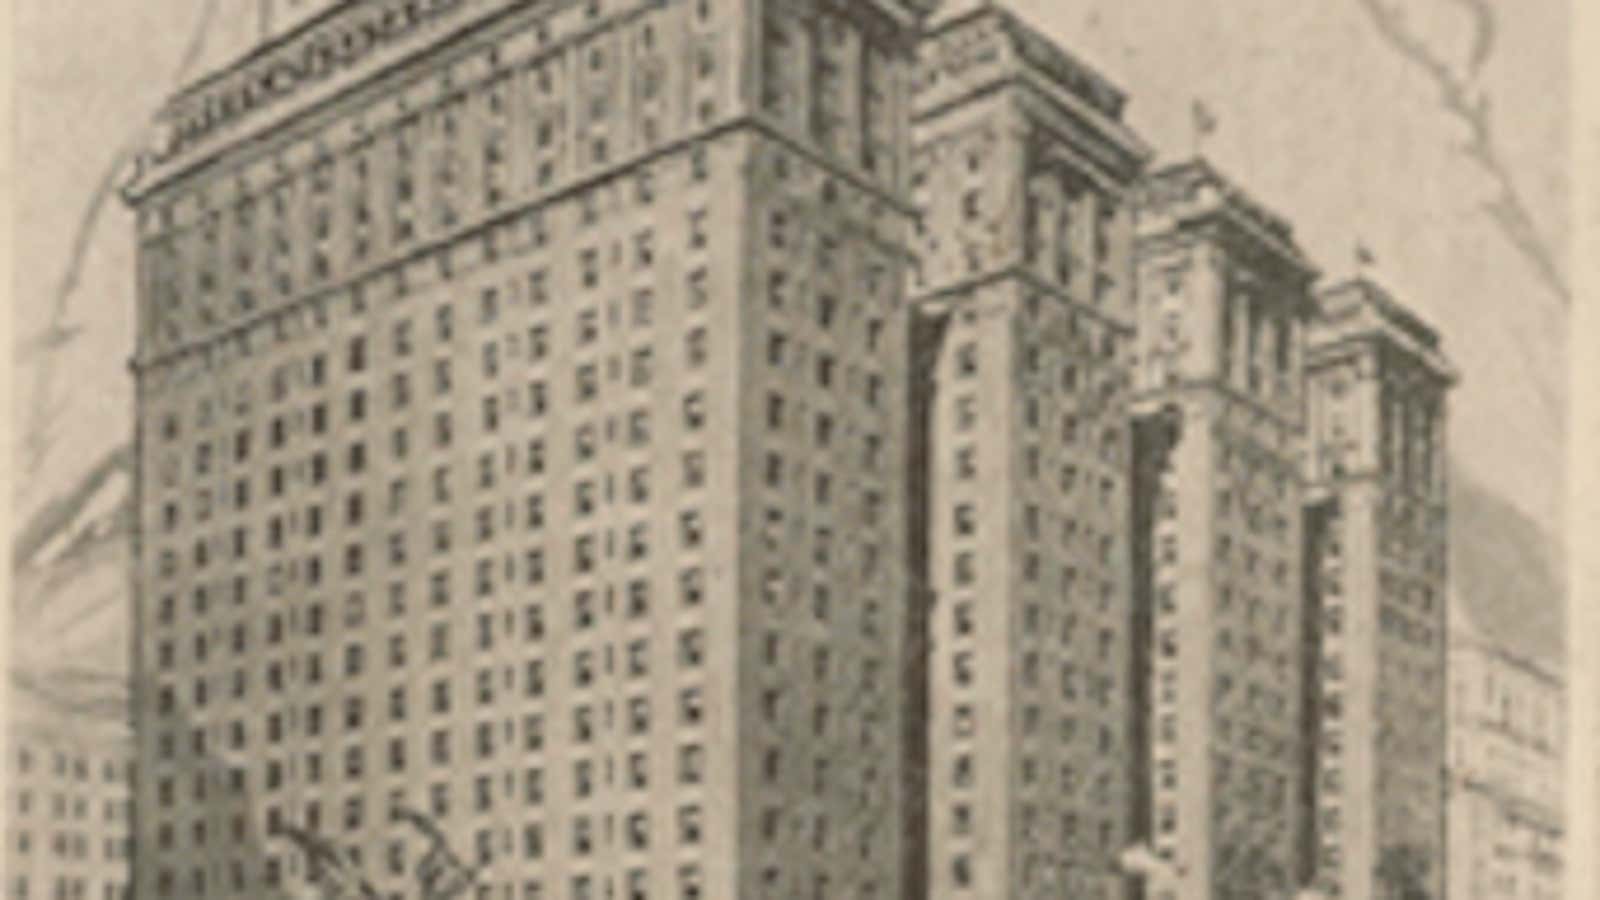 The Hotel Pennsylvania, as pictured on the menu for its 1919 opening dinner.